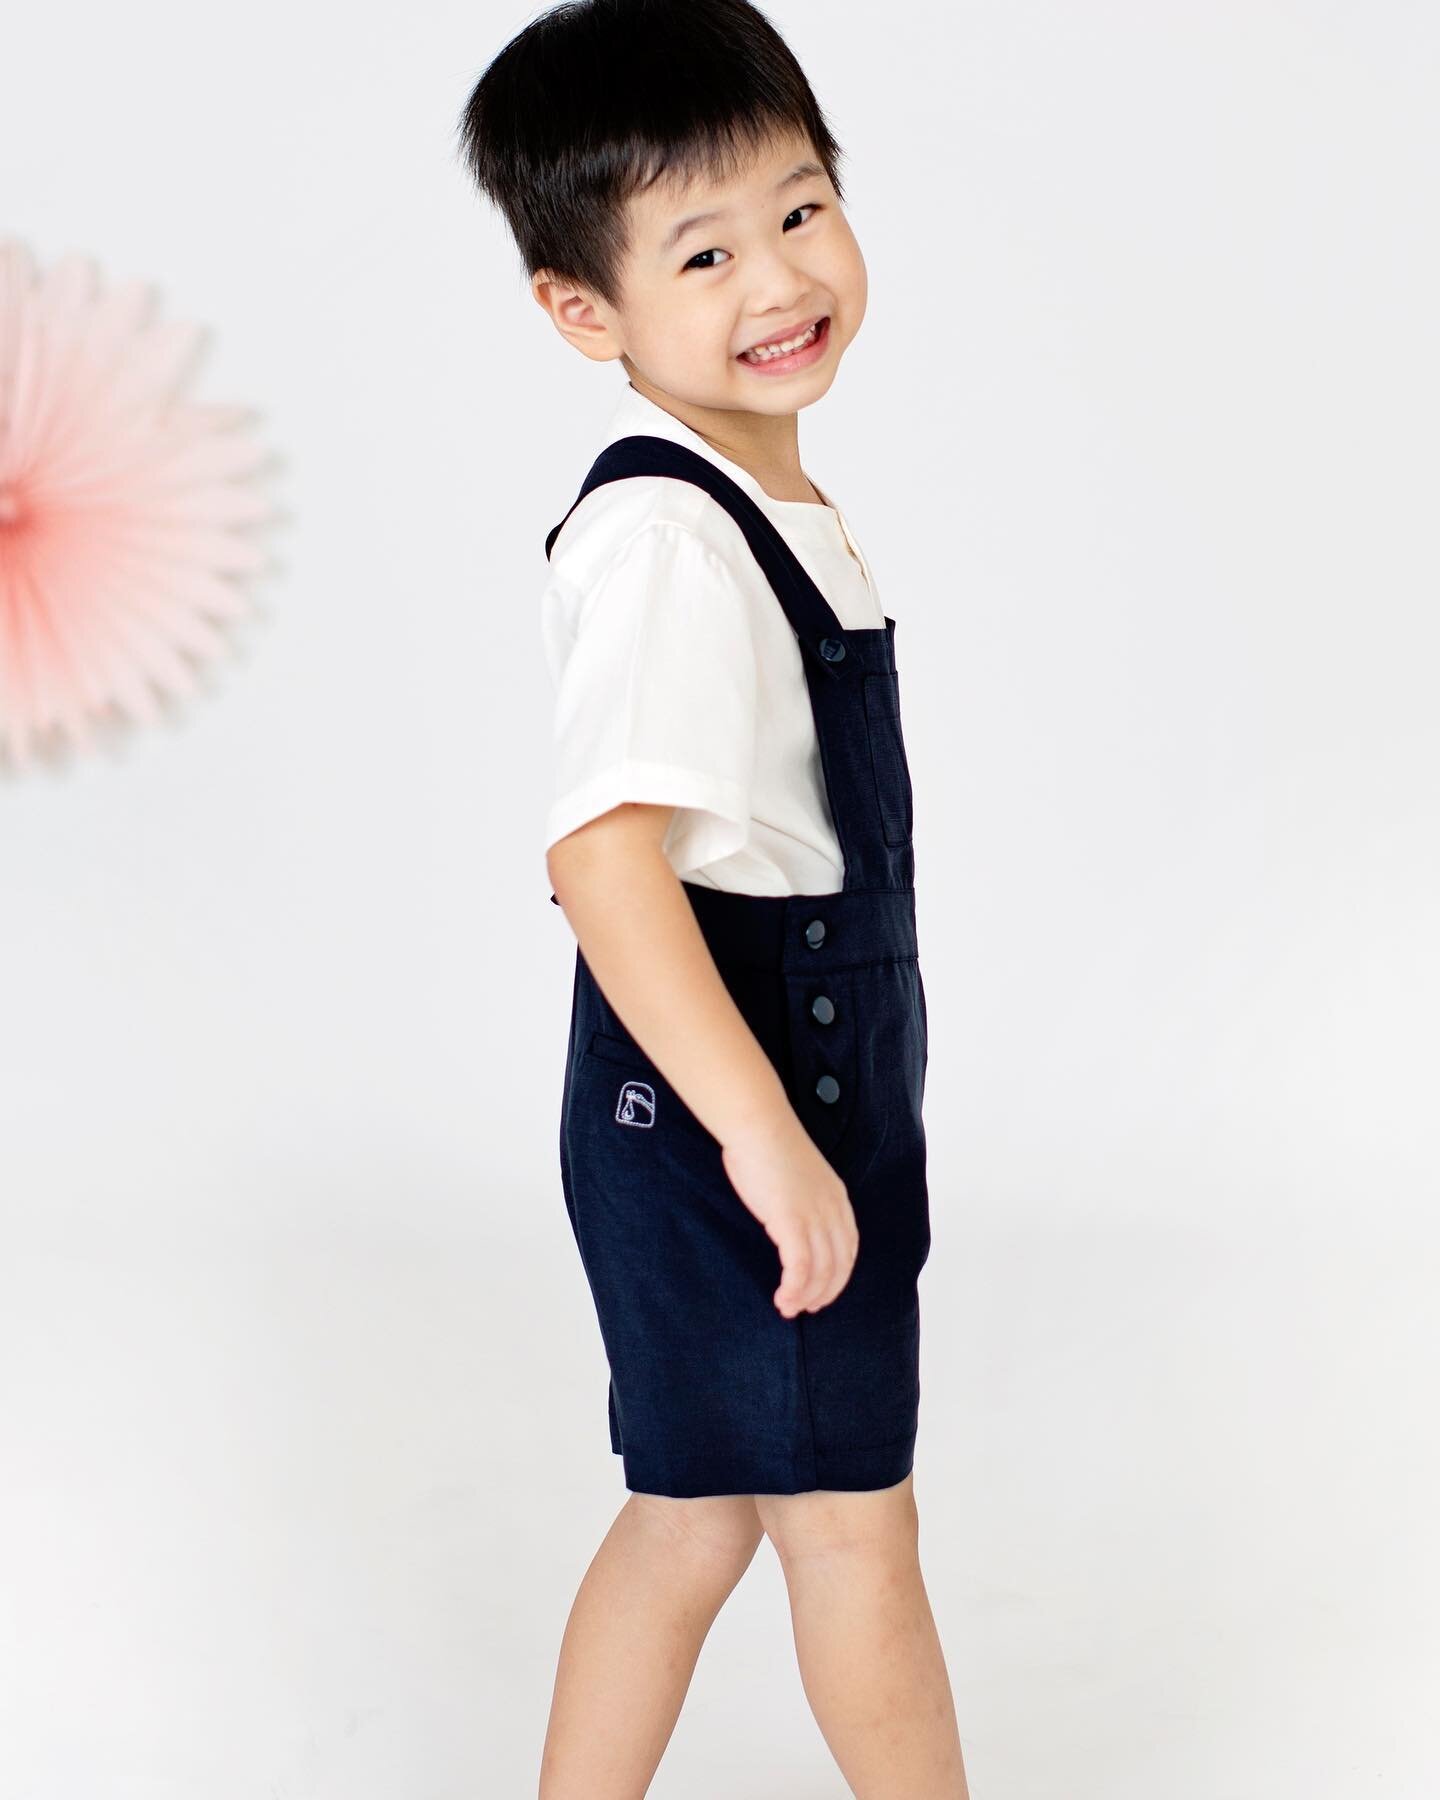 A Little smile never hurt anybody. Smile in our Signature Dungaree Shorts in navy from the boys collection! 💙⁠
⁠
⁠
#girlpower #gogirl #ChildrenOfLuna #kids #baby #love #family #kidsfashion #fashion #fun #cute #kidsofinstagram #happy #babyboy #babies